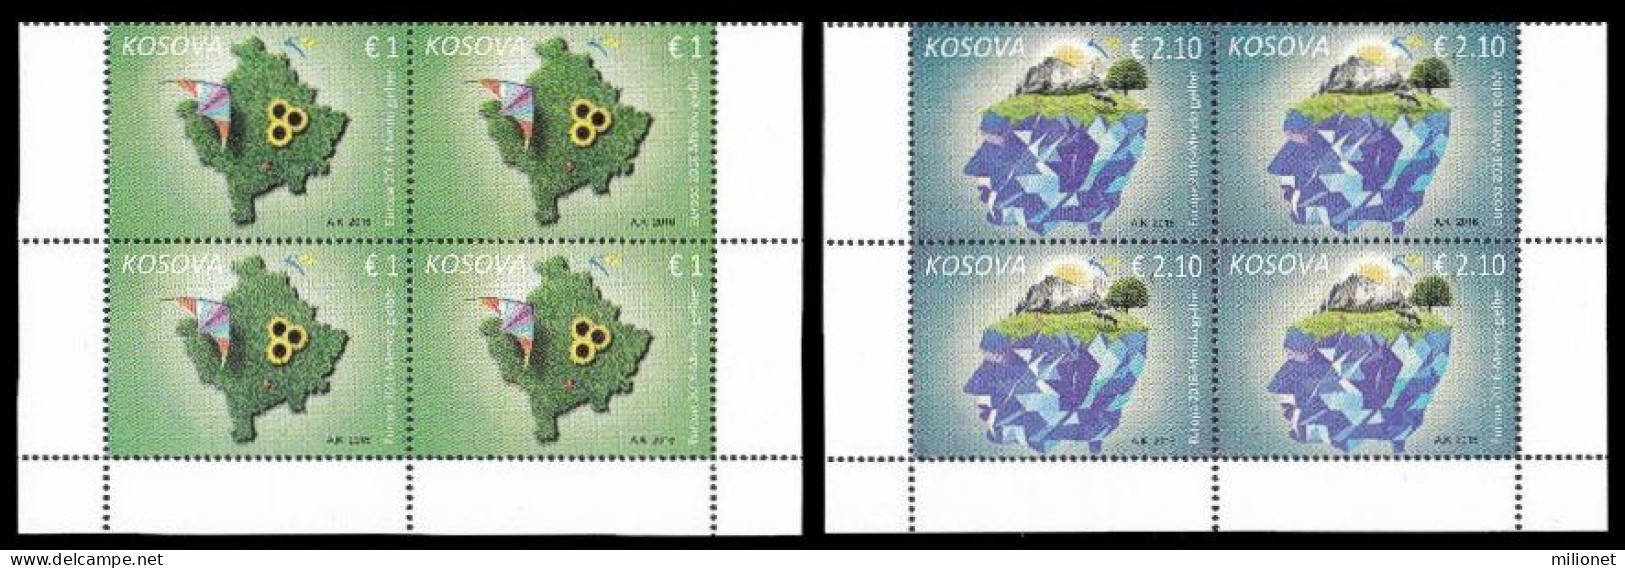 SALE!!! KOSOVO 2016 EUROPA CEPT Think Green 2 Blocks Of 4 Stamps MNH ** - 2016